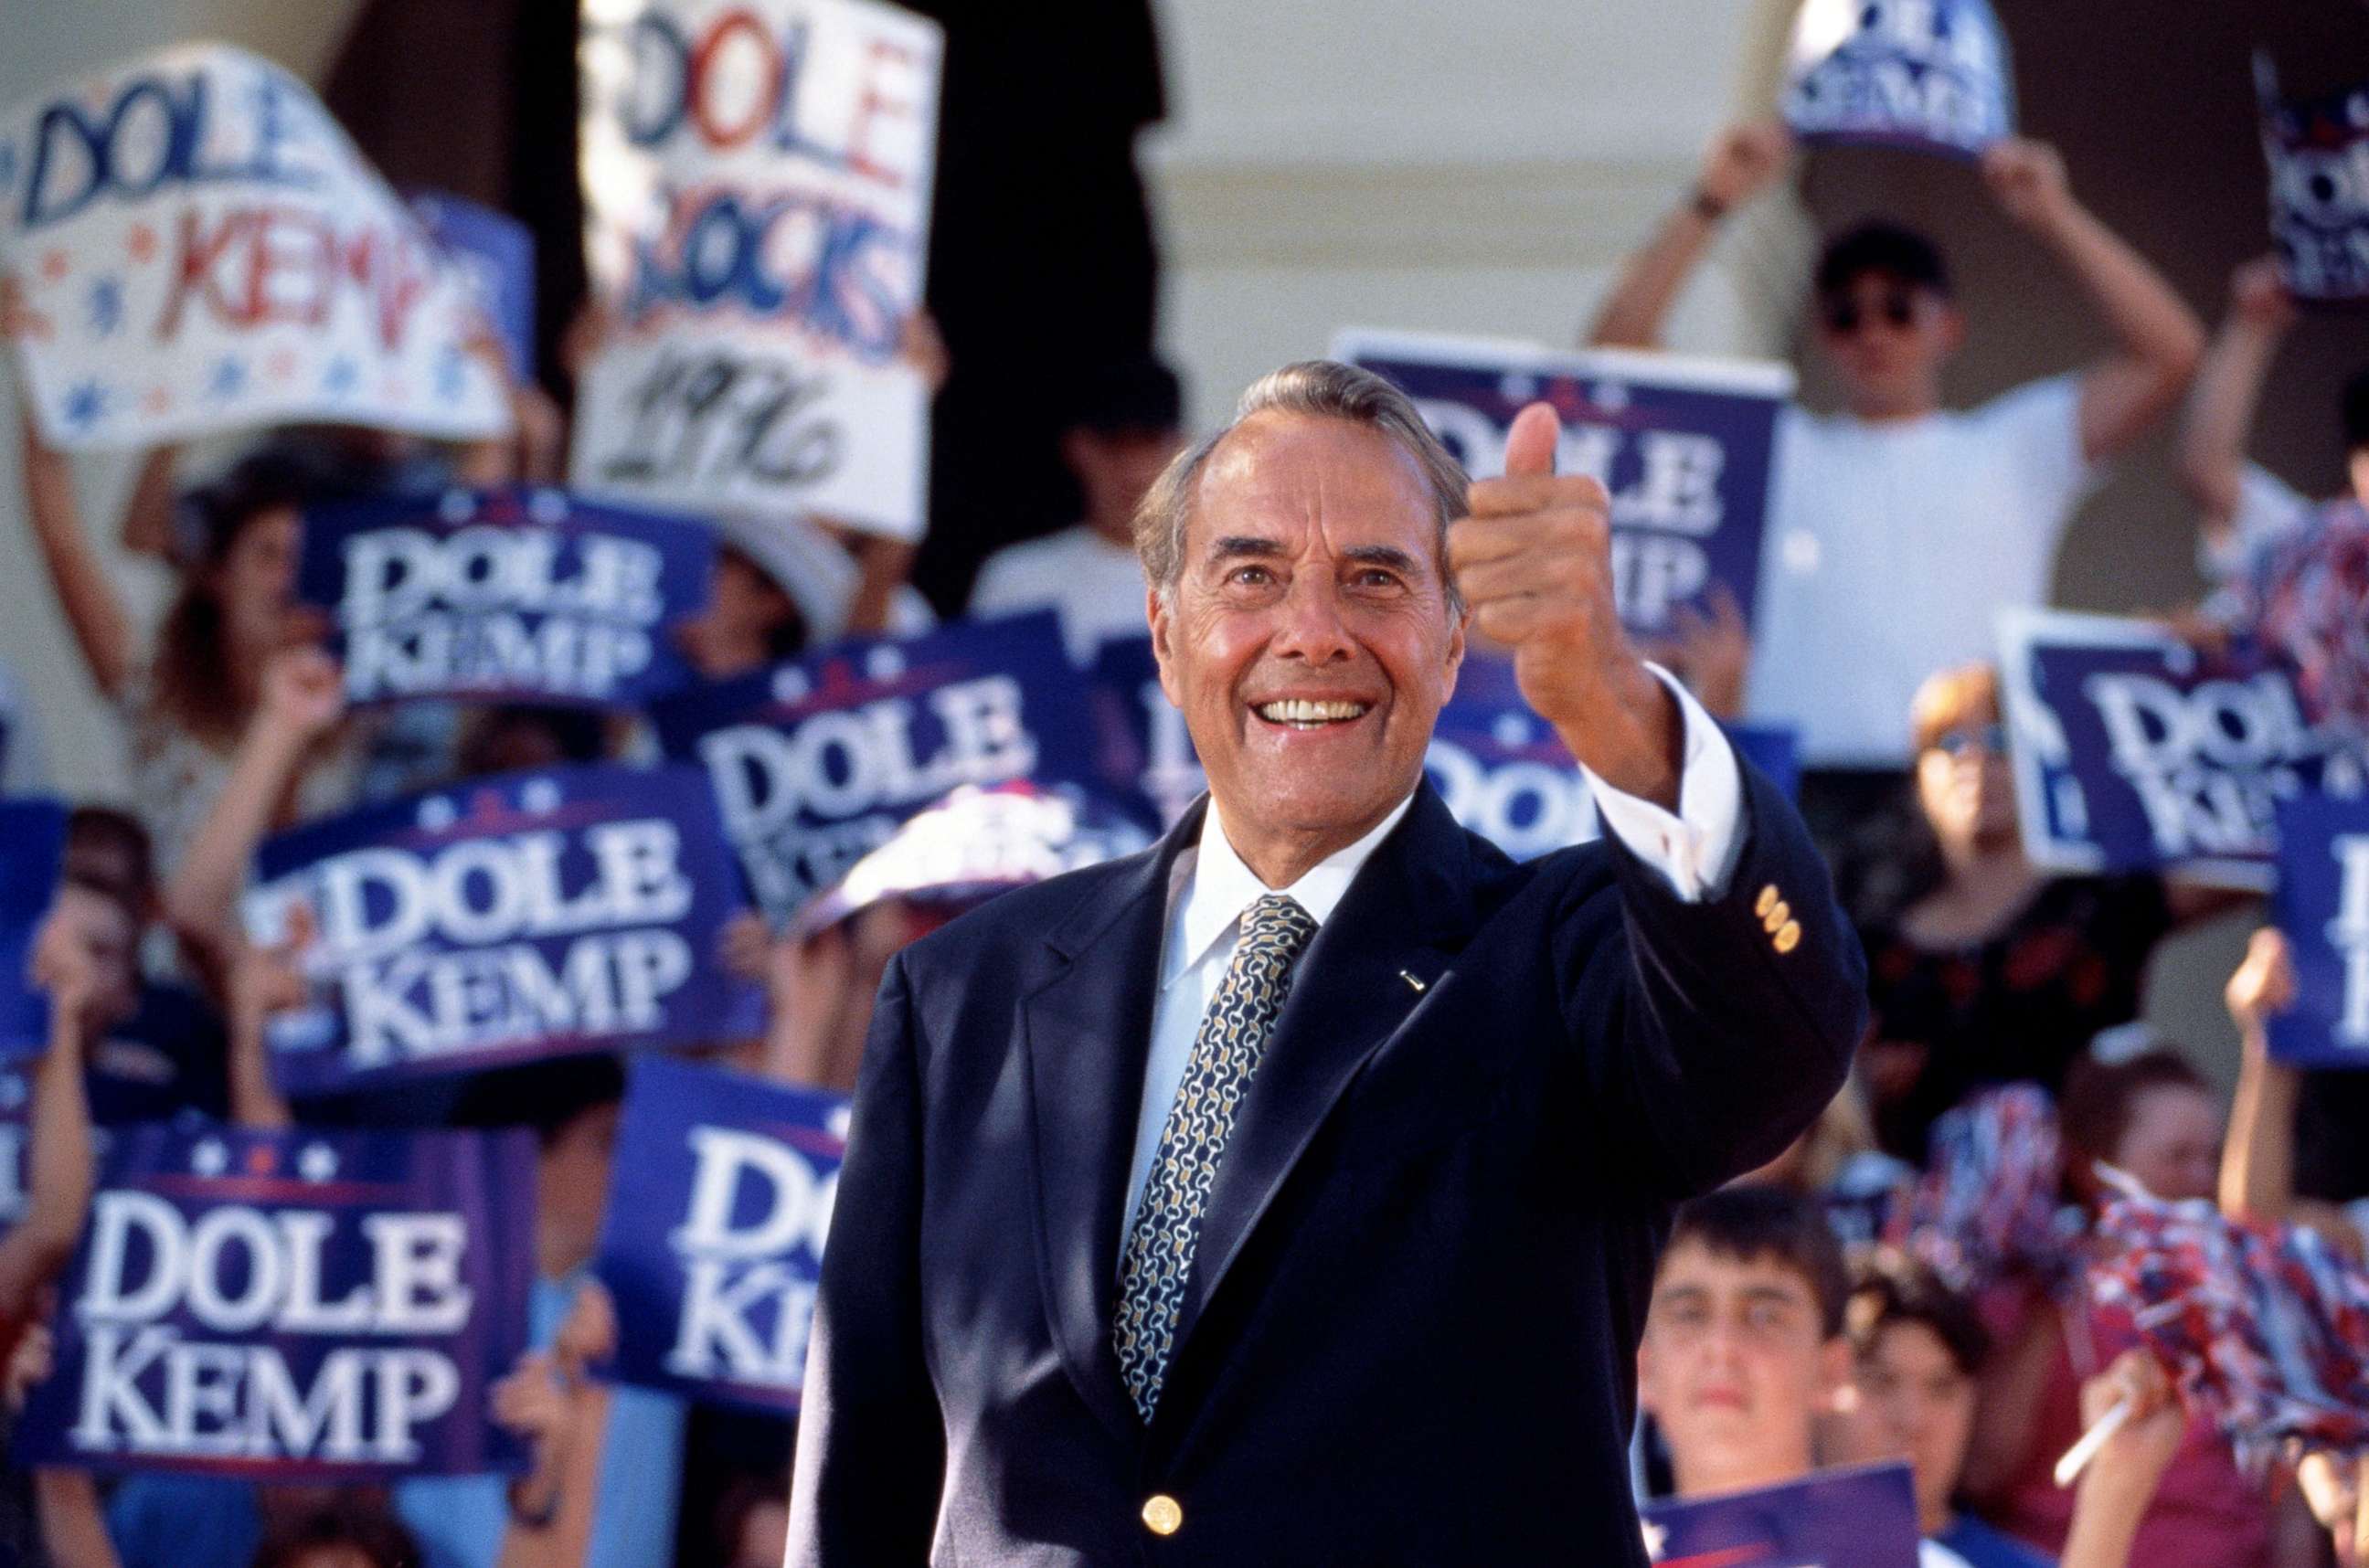 PHOTO: Sen. Bob Dole gives the "thumbs up" sign during a presidential rally in 1996.